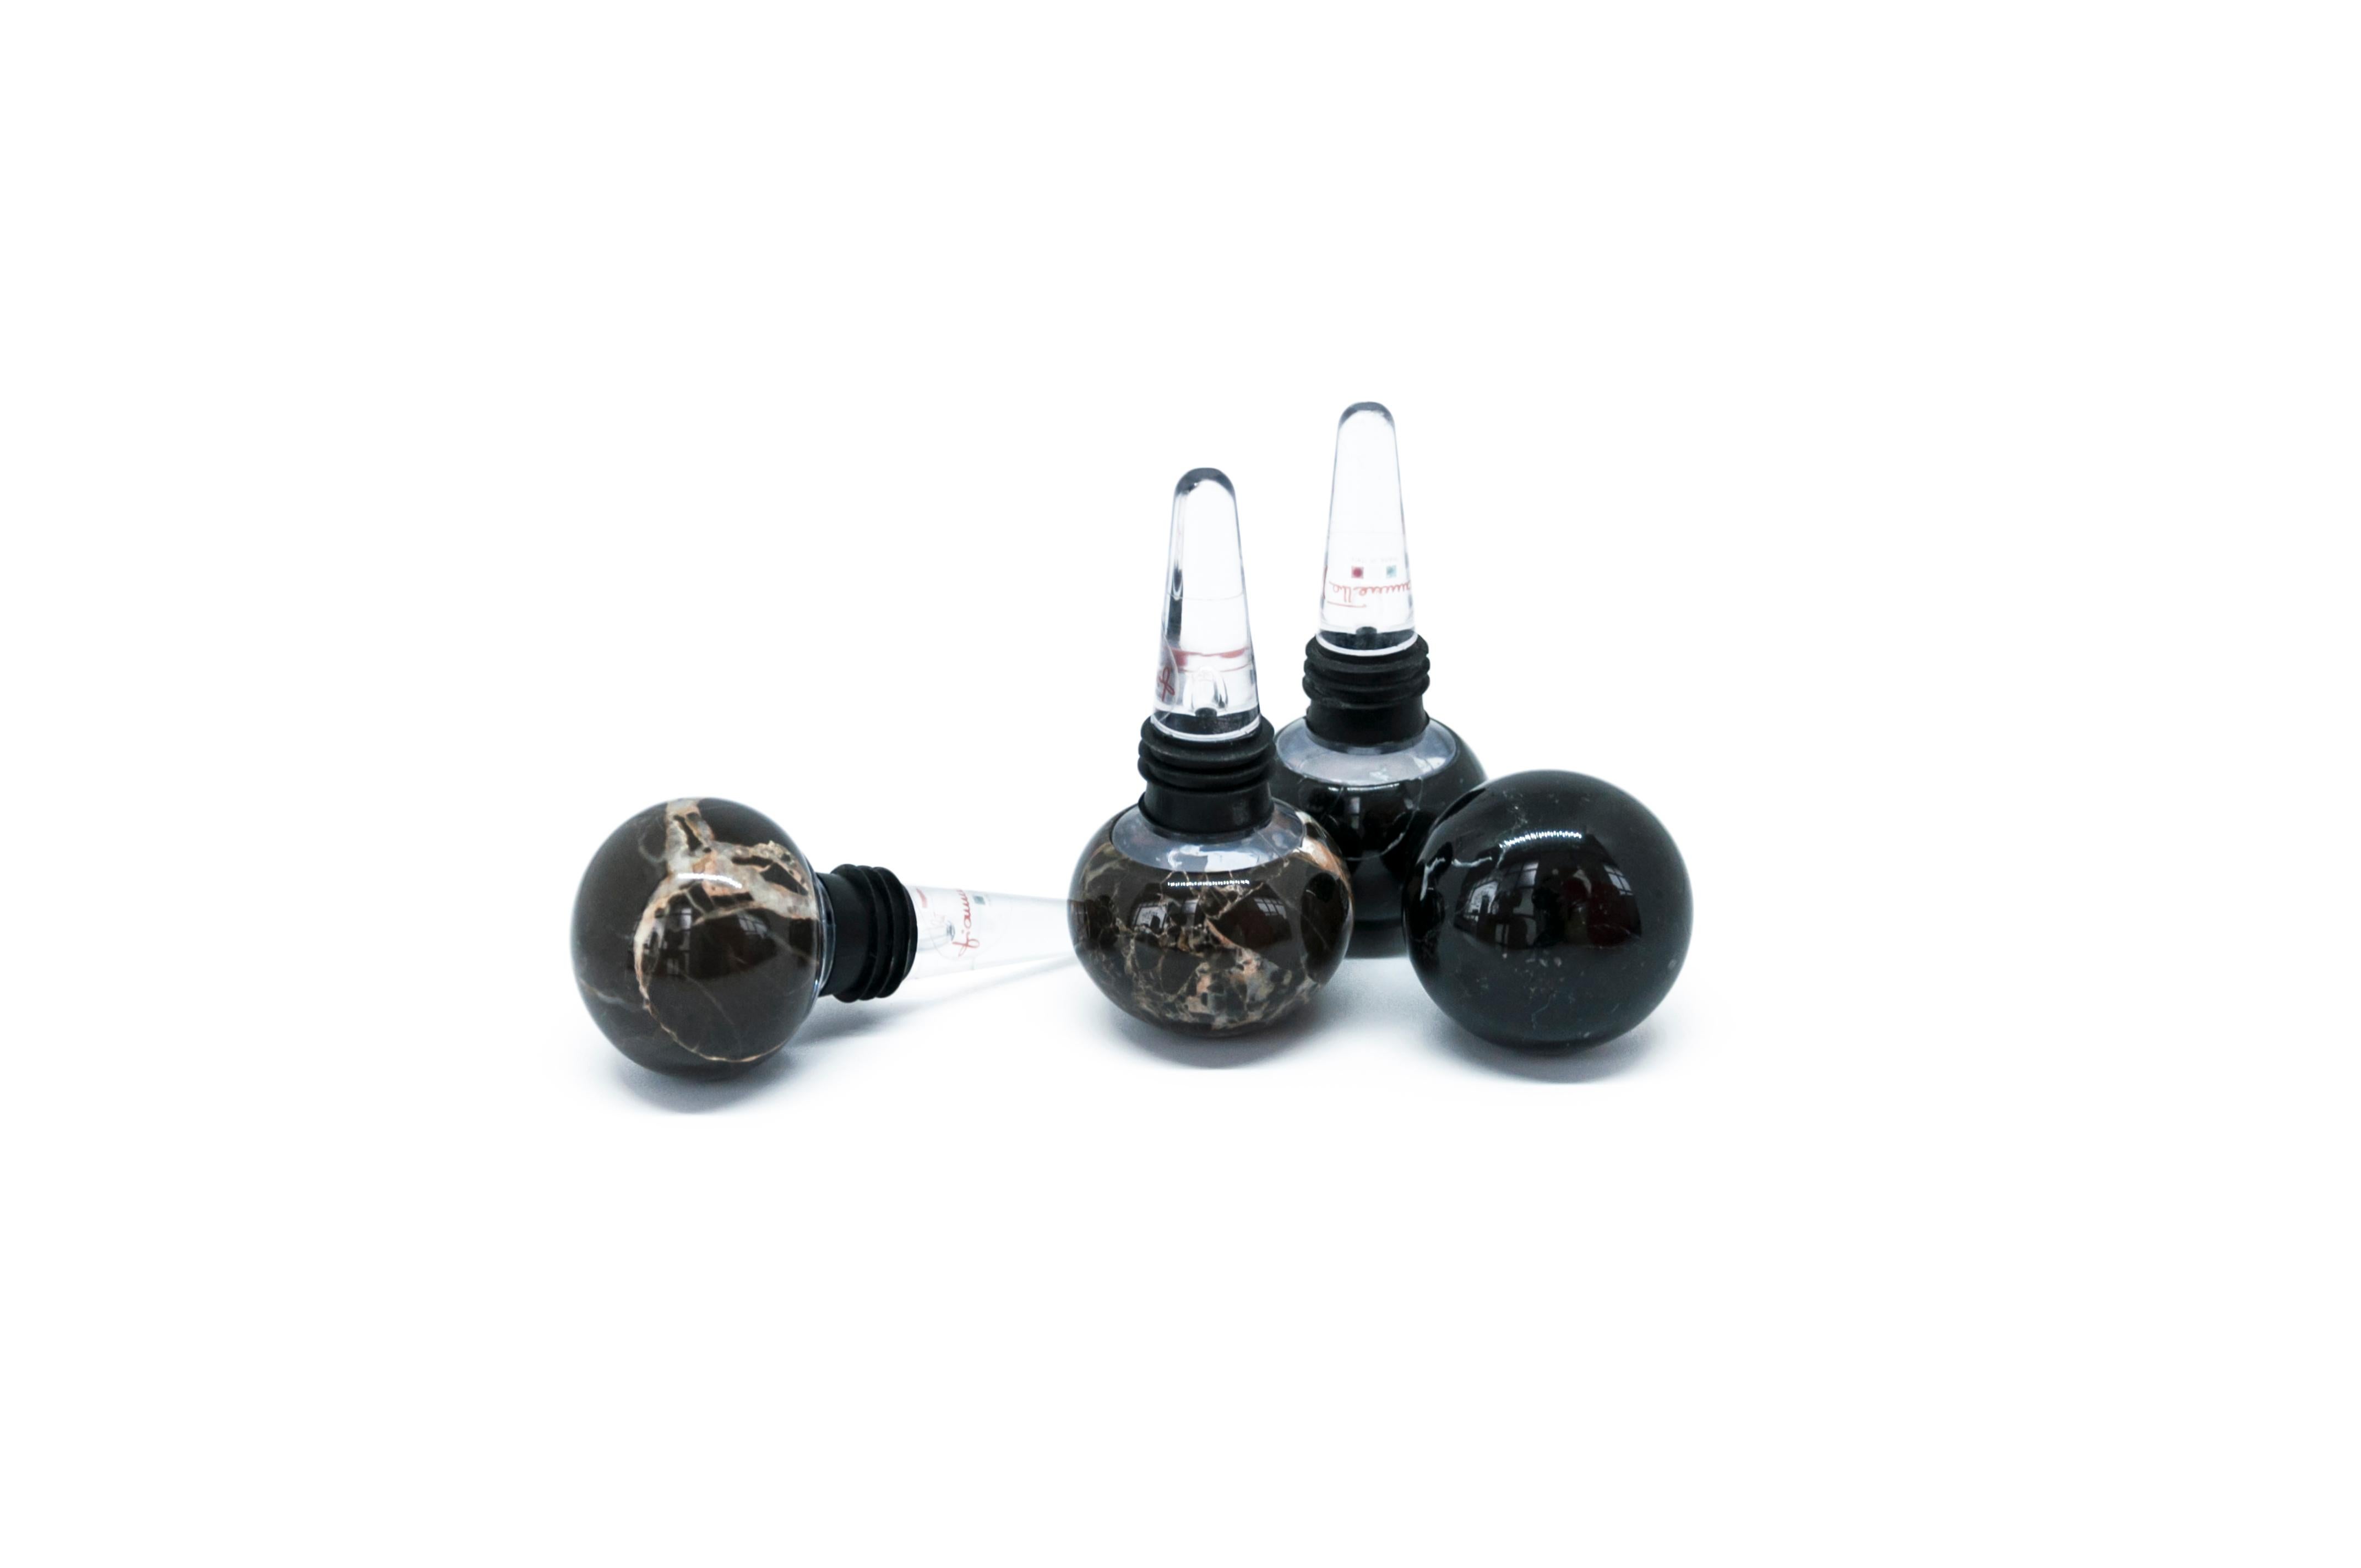 Set of 4 bottle stoppers (2 in black Marquina marble and 2 in Portoro marble + plexiglass), ideal for Champagne glass bottles.

Each piece is in a way unique (since each marble block is different in veins and shades) and handcrafted in Italy. Slight